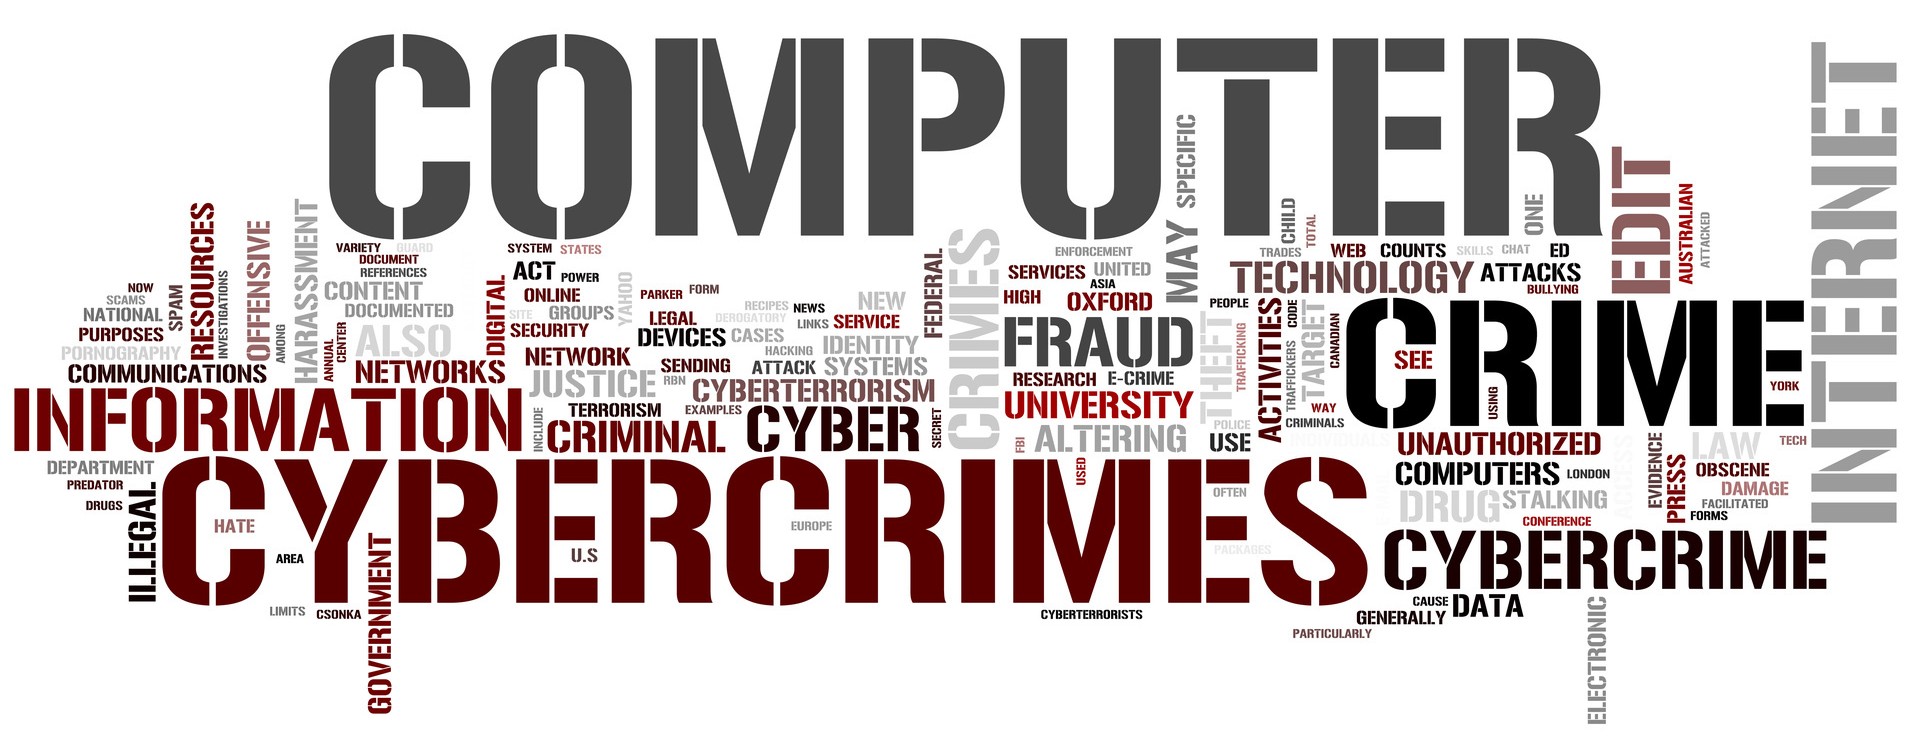 Causes of cyber crime